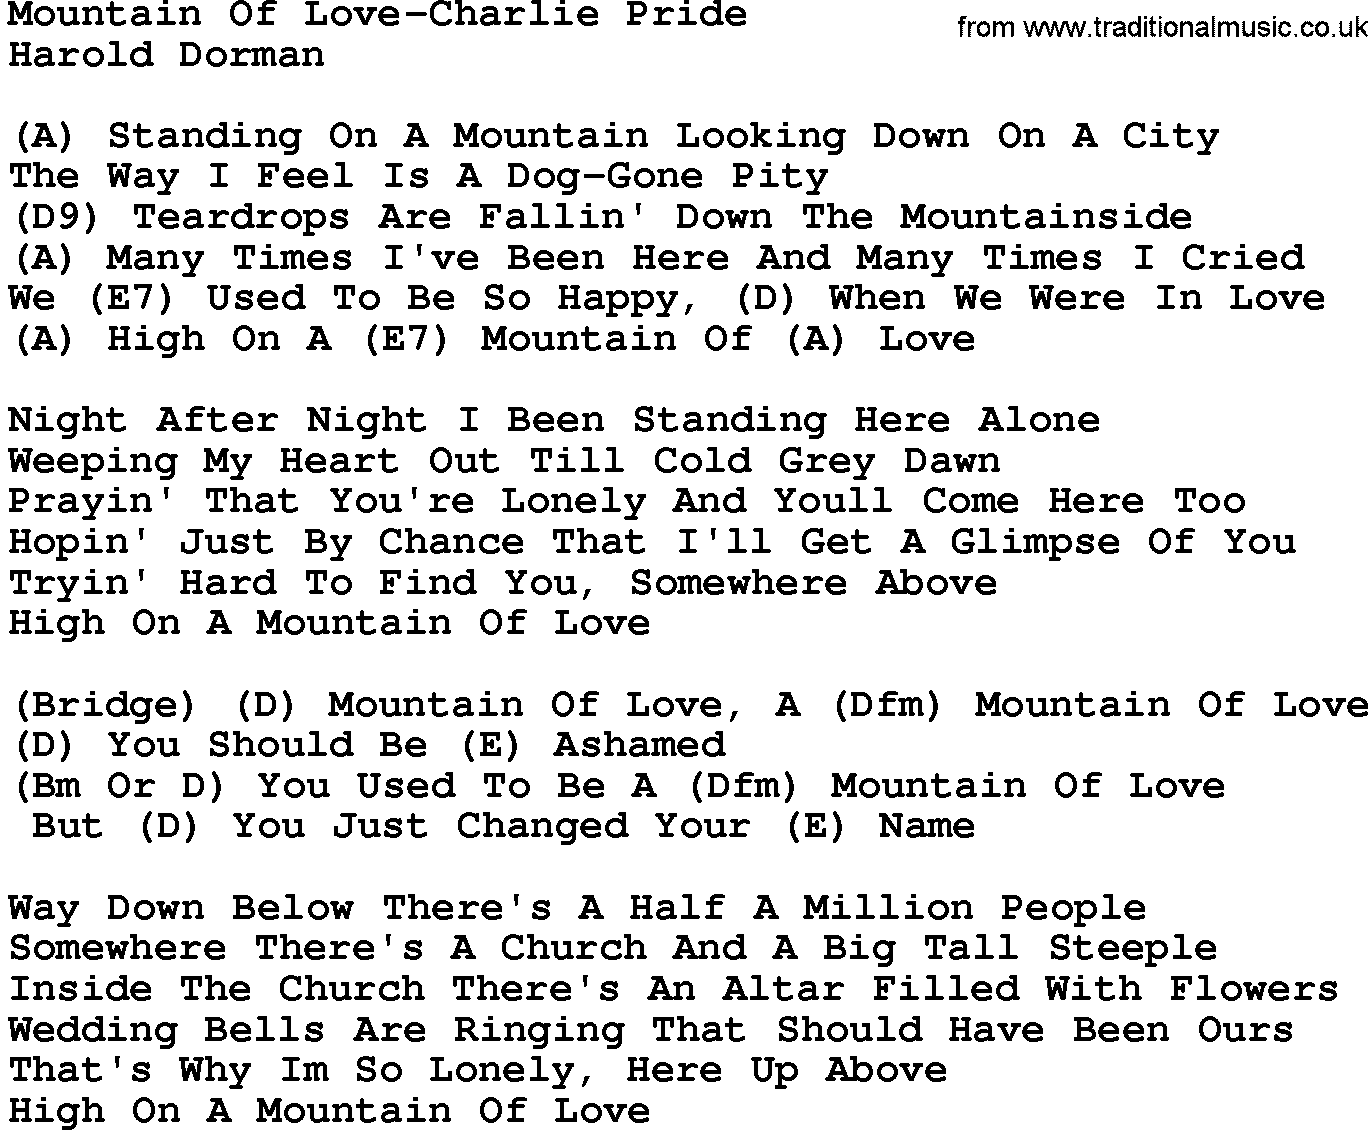 Country music song: Mountain Of Love-Charlie Pride lyrics and chords